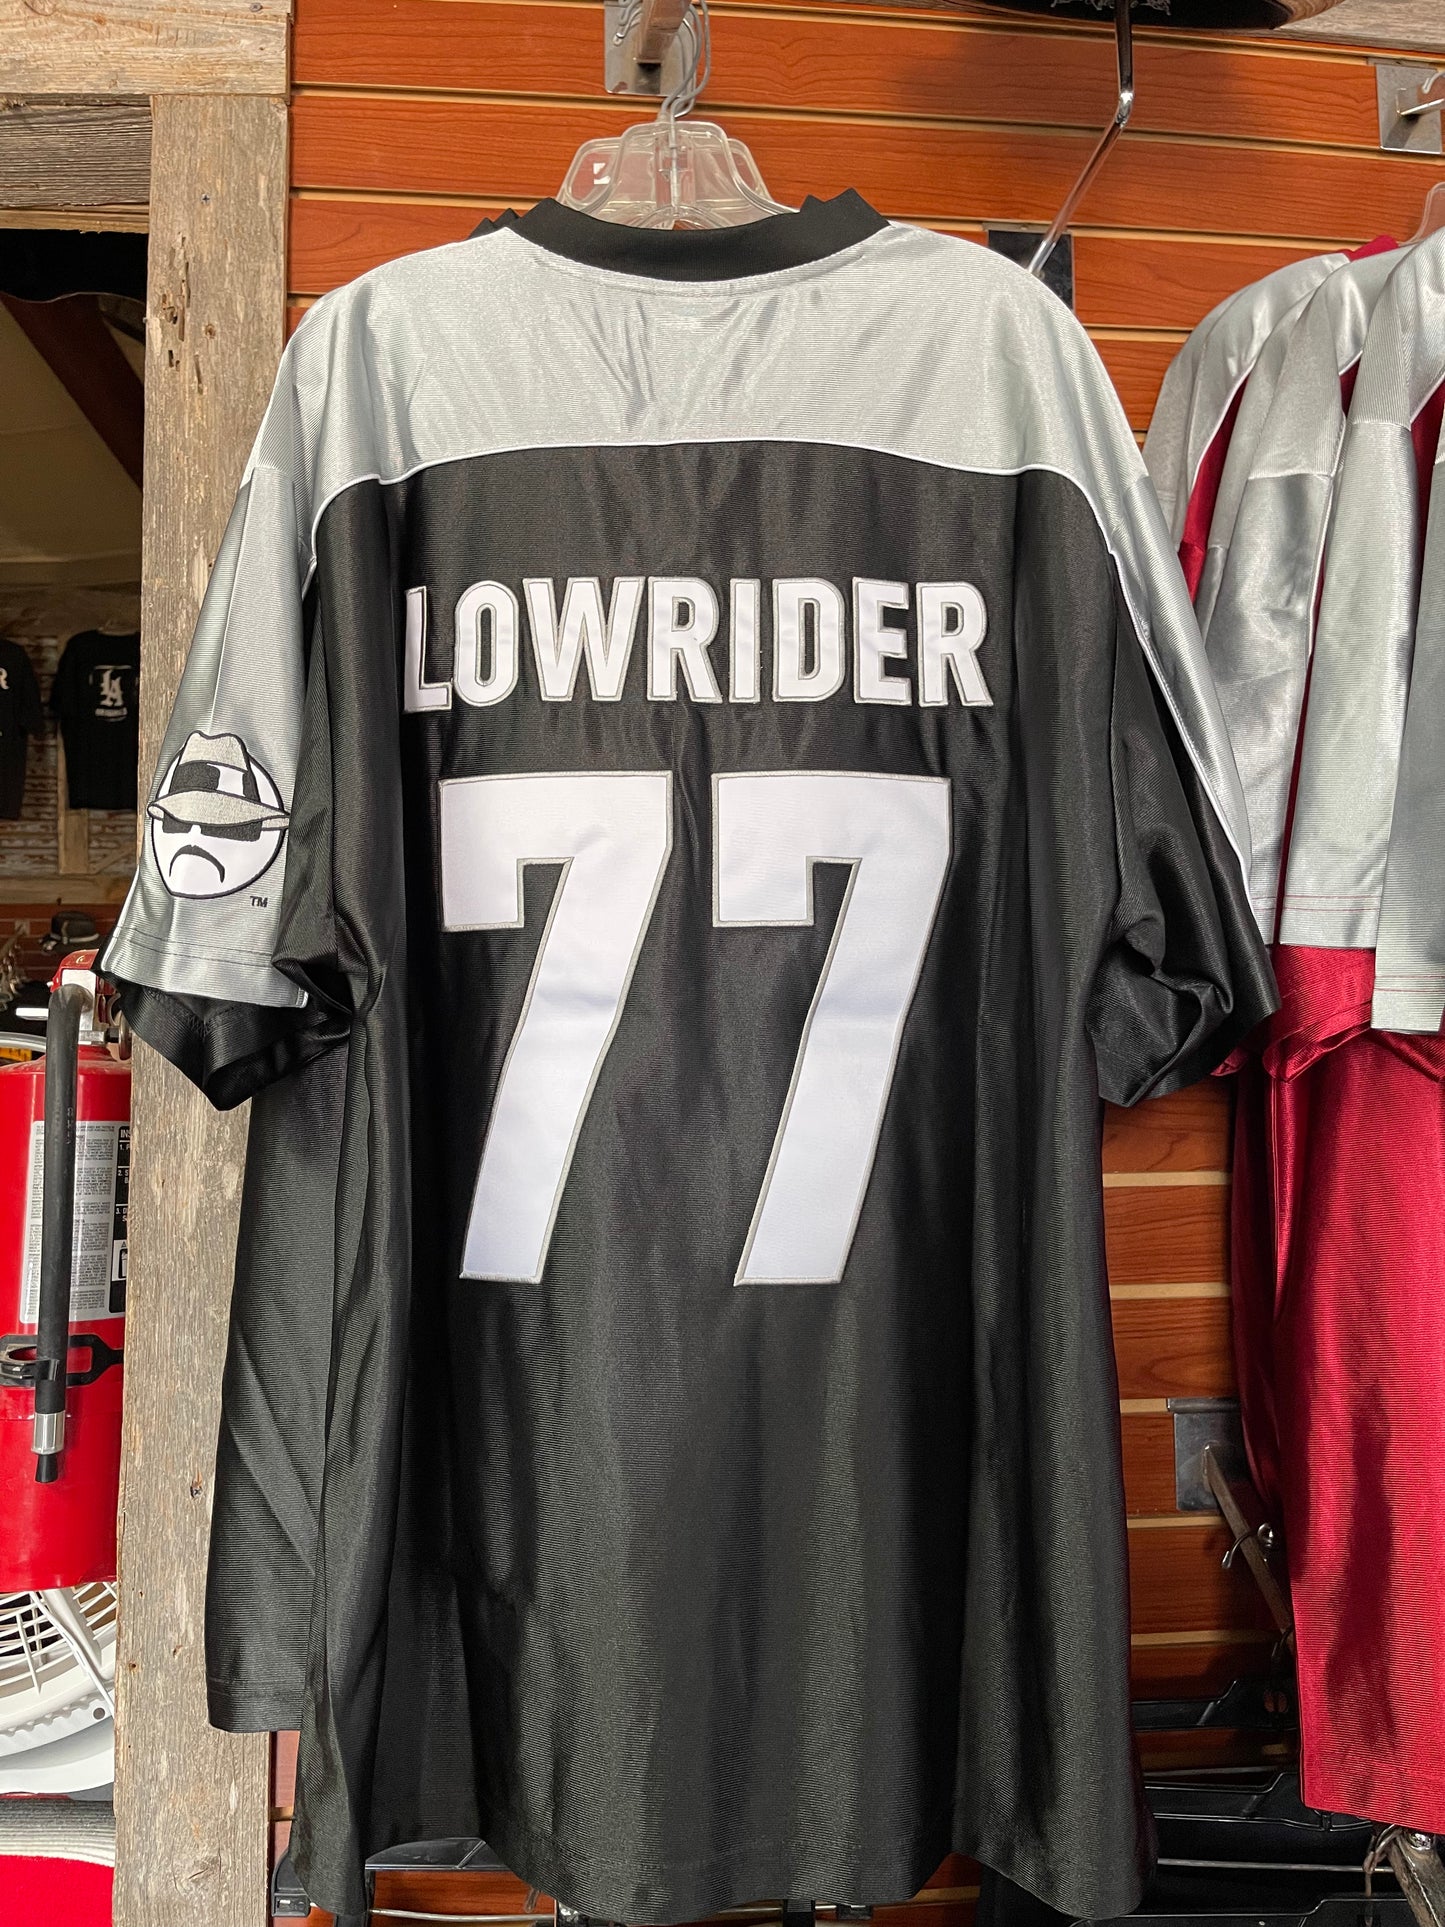 Lowrider Jersey 77 (3 colors)